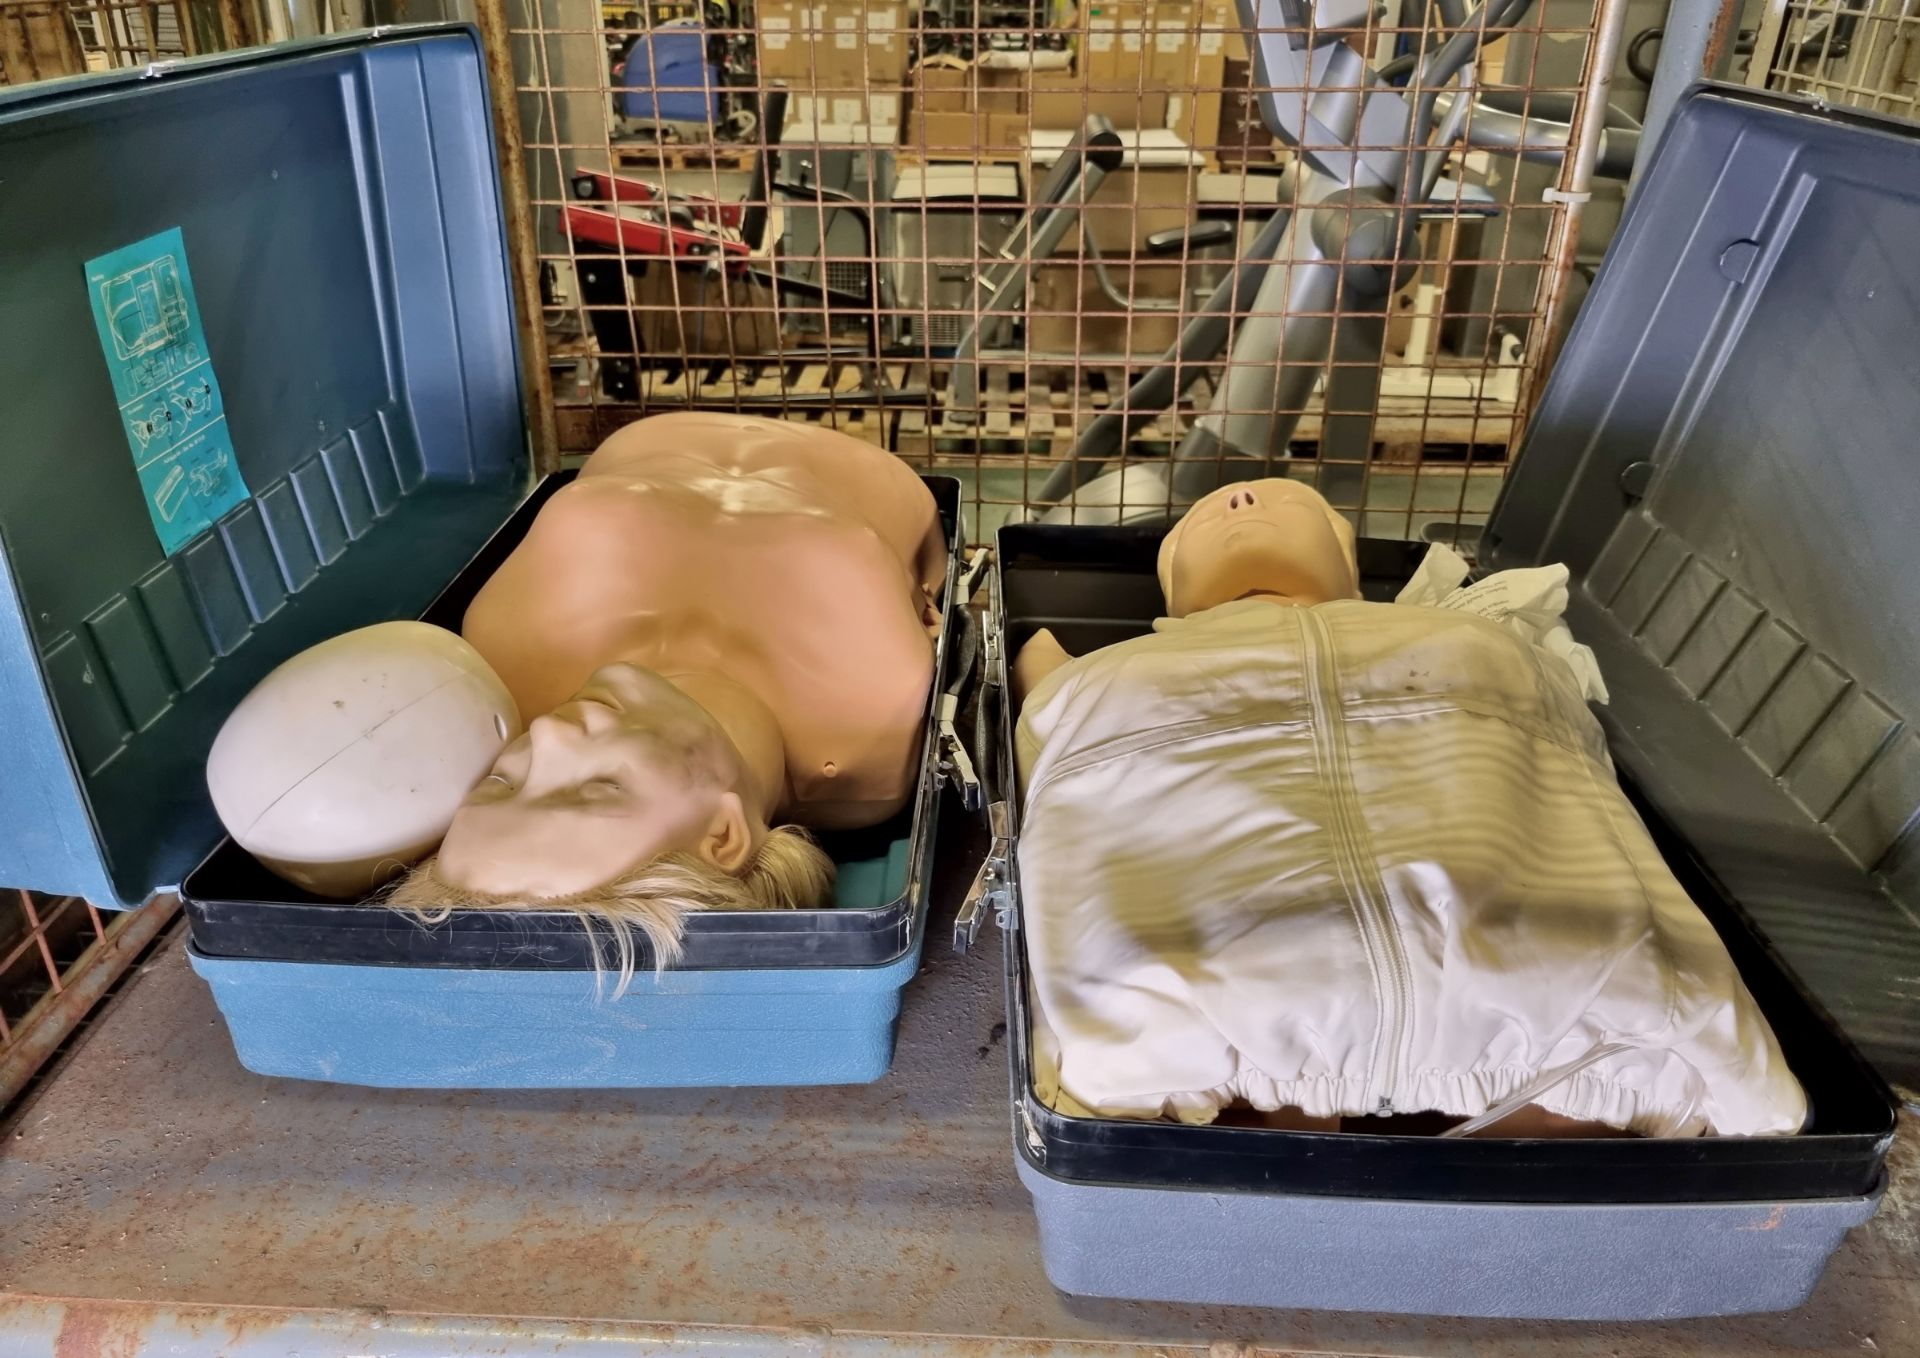 2x Laerdal Resusci Anne Torso CPR medical training dummies in cases - Image 2 of 6